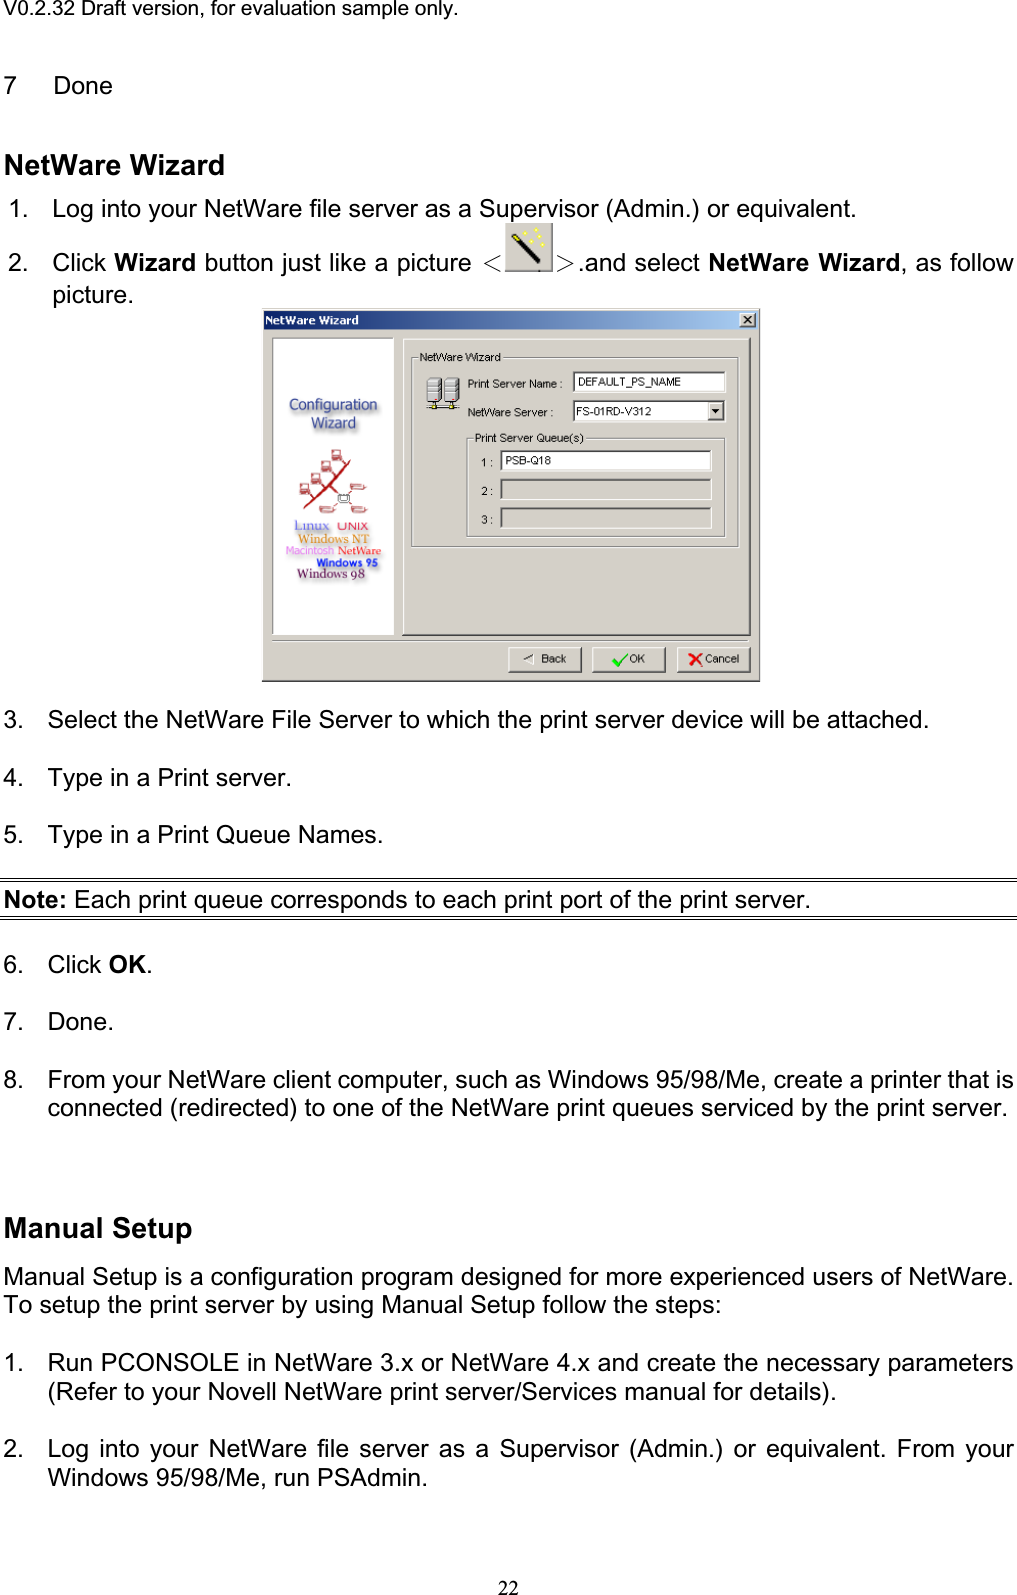 V0.2.32 Draft version, for evaluation sample only.7 Done NetWare Wizard 1. Log into your NetWare file server as a Supervisor (Admin.) or equivalent. 2. Click Wizard button just like a picture ІЇ.and select NetWare Wizard, as follow picture.3. Select the NetWare File Server to which the print server device will be attached. 4. Type in a Print server. 5. Type in a Print Queue Names. Note: Each print queue corresponds to each print port of the print server. 6. Click OK.7. Done. 8. From your NetWare client computer, such as Windows 95/98/Me, create a printer that is connected (redirected) to one of the NetWare print queues serviced by the print server. Manual Setup Manual Setup is a configuration program designed for more experienced users of NetWare. To setup the print server by using Manual Setup follow the steps: 1. Run PCONSOLE in NetWare 3.x or NetWare 4.x and create the necessary parameters (Refer to your Novell NetWare print server/Services manual for details).2. Log into your NetWare file server as a Supervisor (Admin.) or equivalent. From your Windows 95/98/Me, run PSAdmin. 22